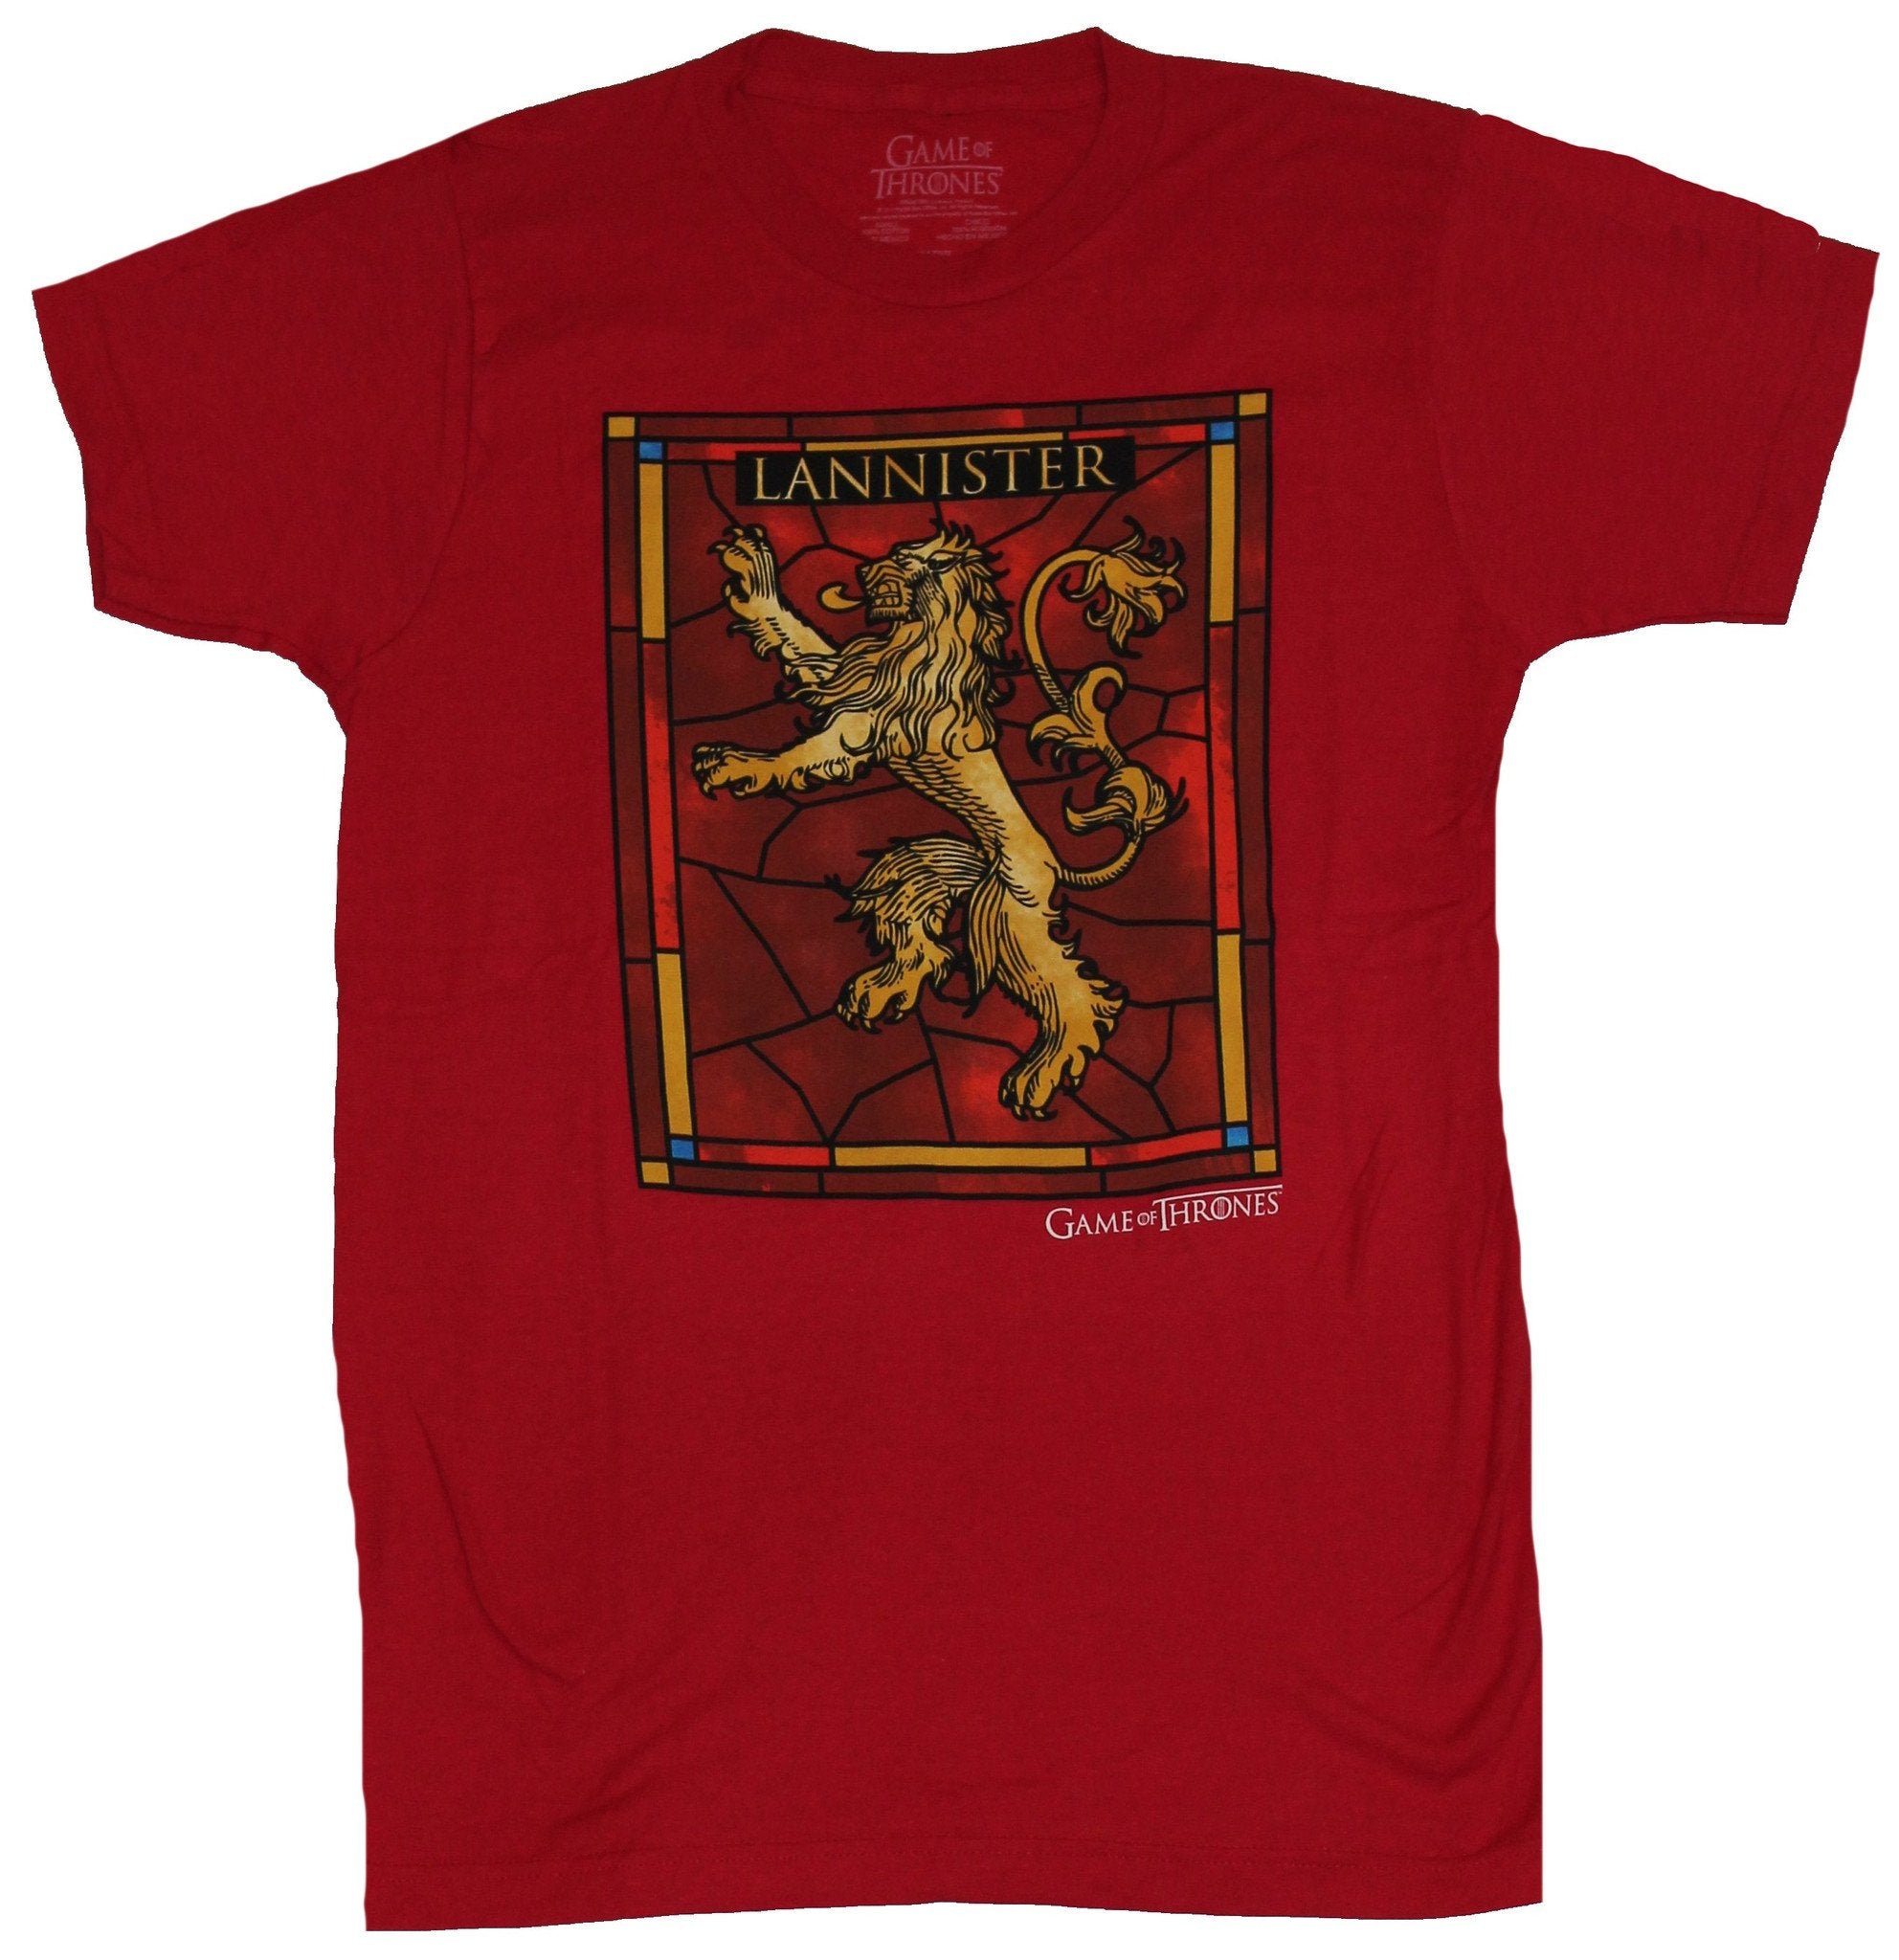 Game of Thrones Mens T-Shirt - Stained Glass Style Lannister Image